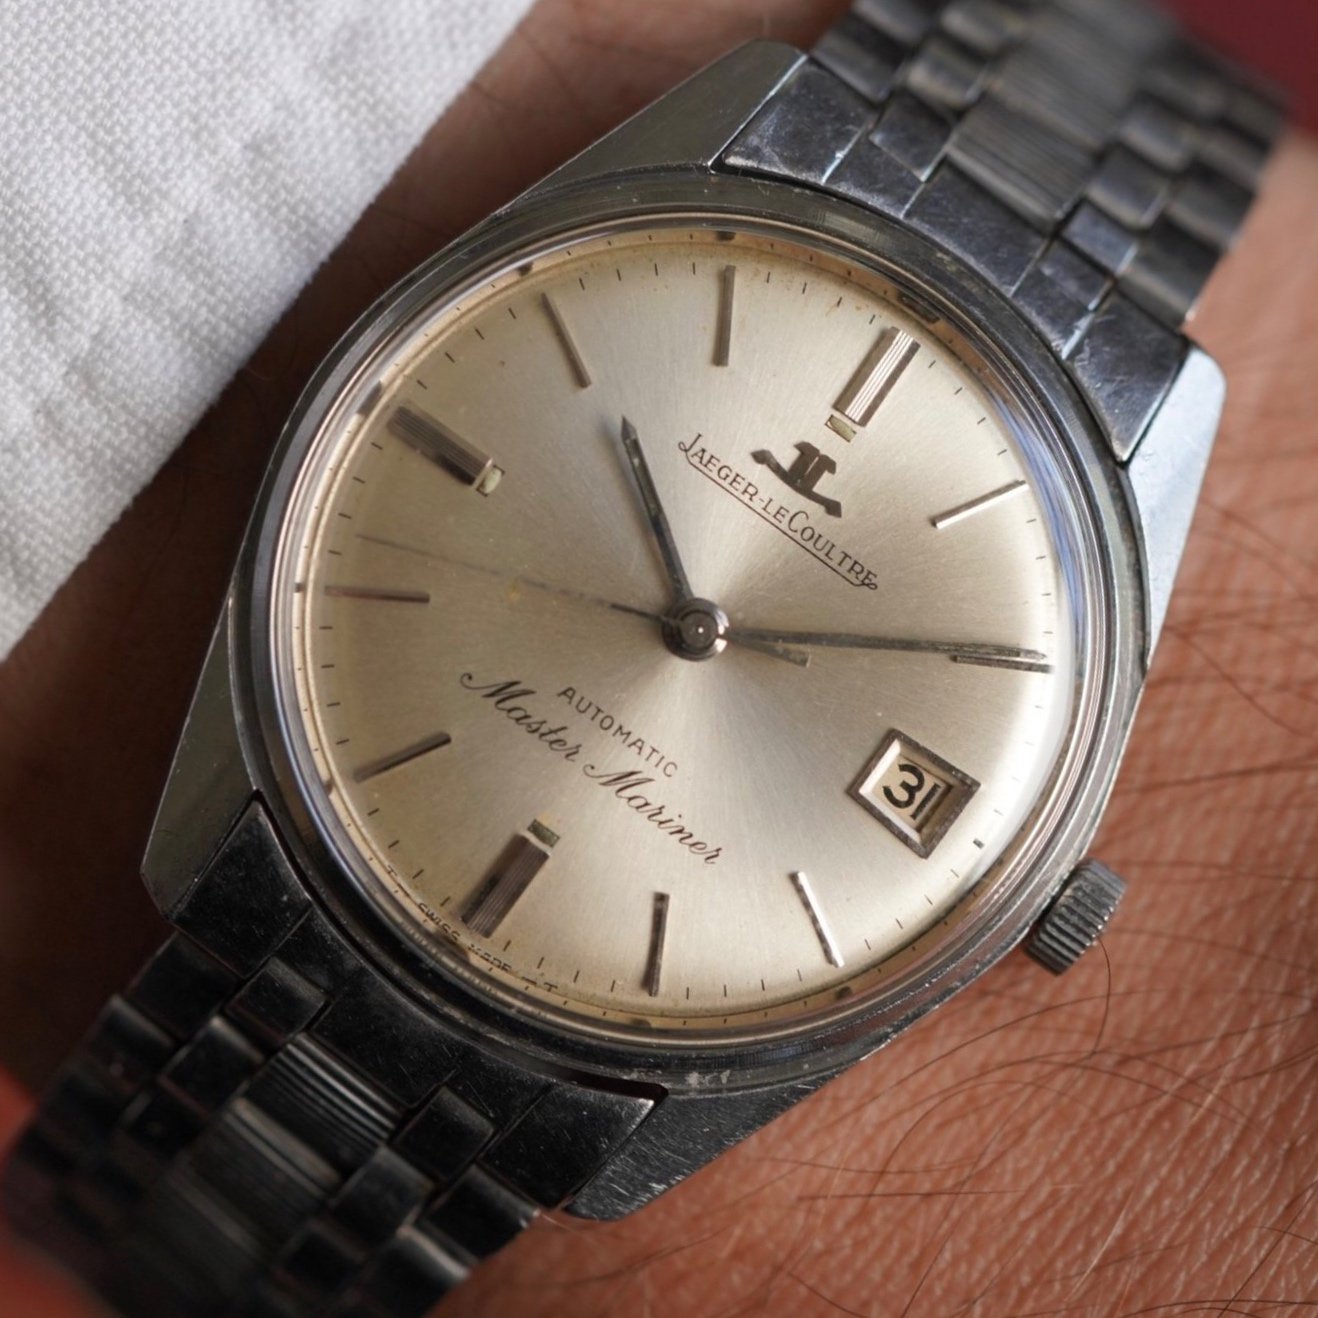  Jaeger-LeCoultre Master Mariner Reference E 557 w/ Gay Freres Bracelet w/ Extract Unpolished